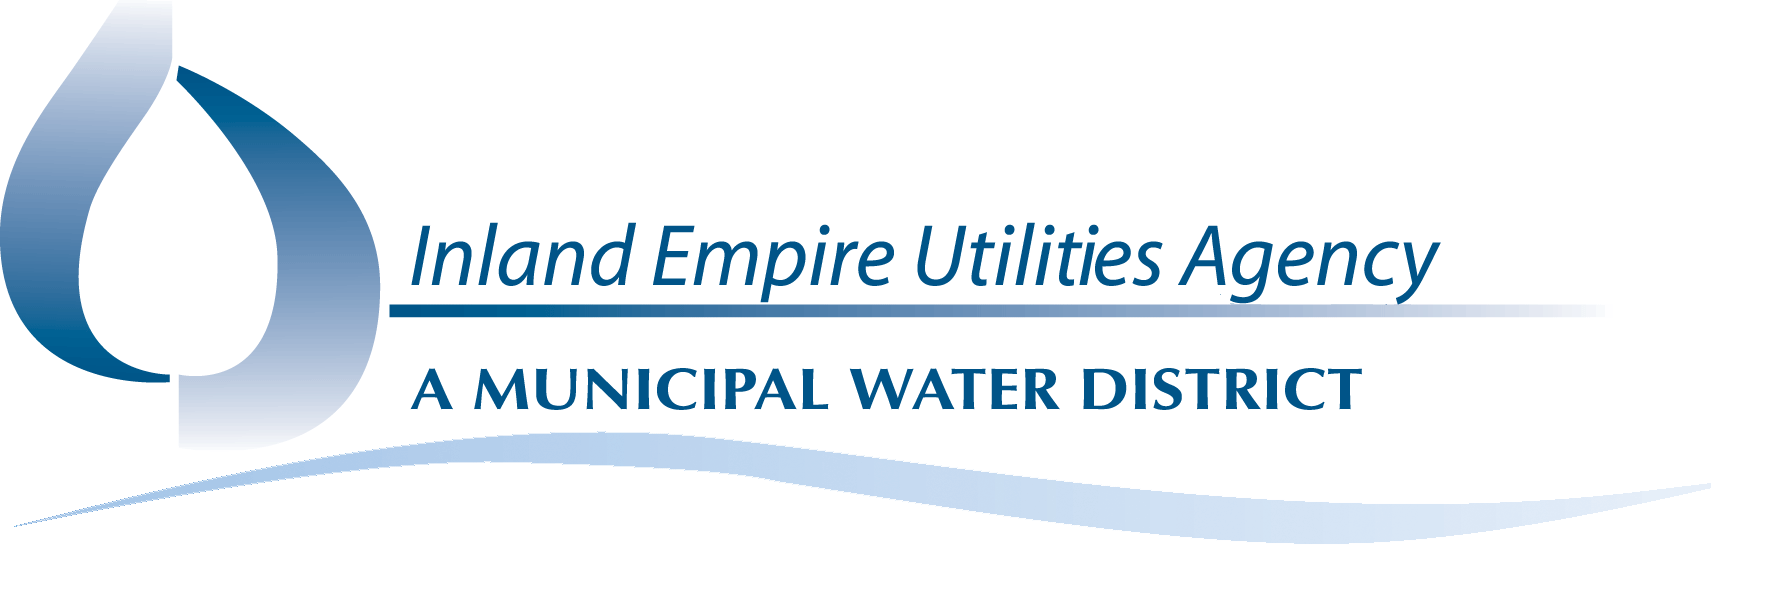 Inland_Empire_Utilities_Agency.png